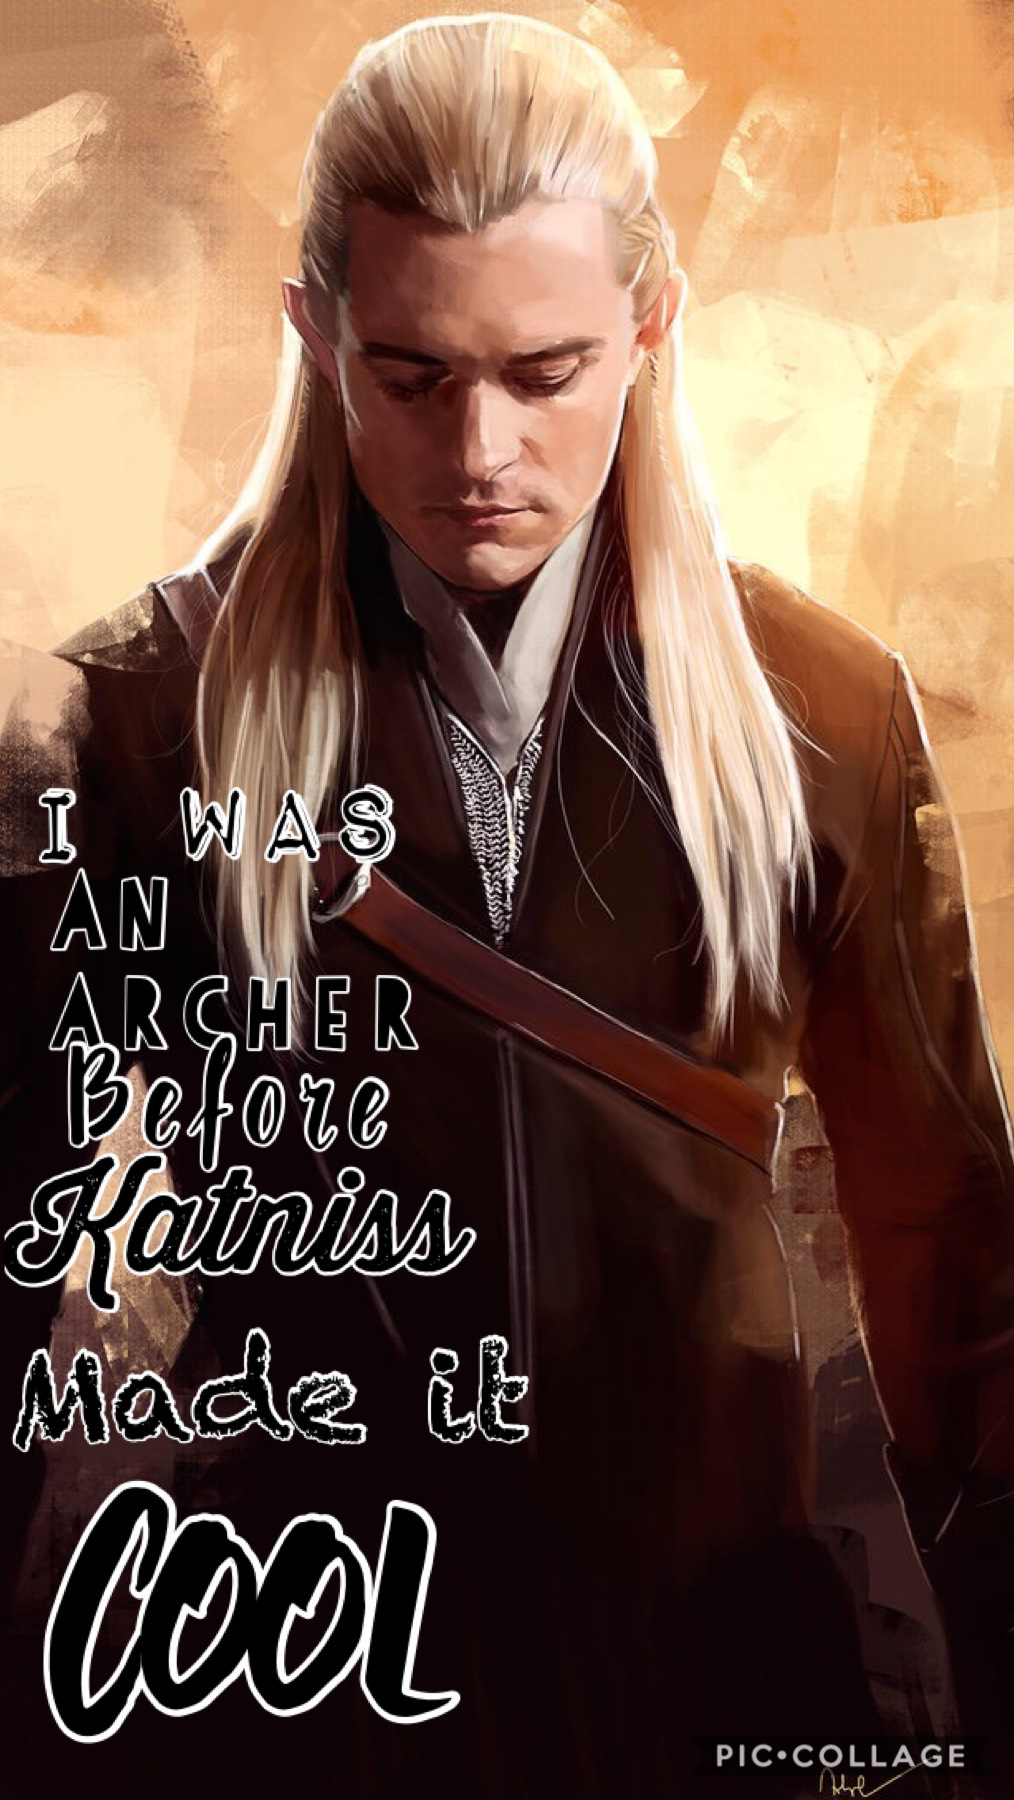 Legolas is my all time fav lord of the rings character 